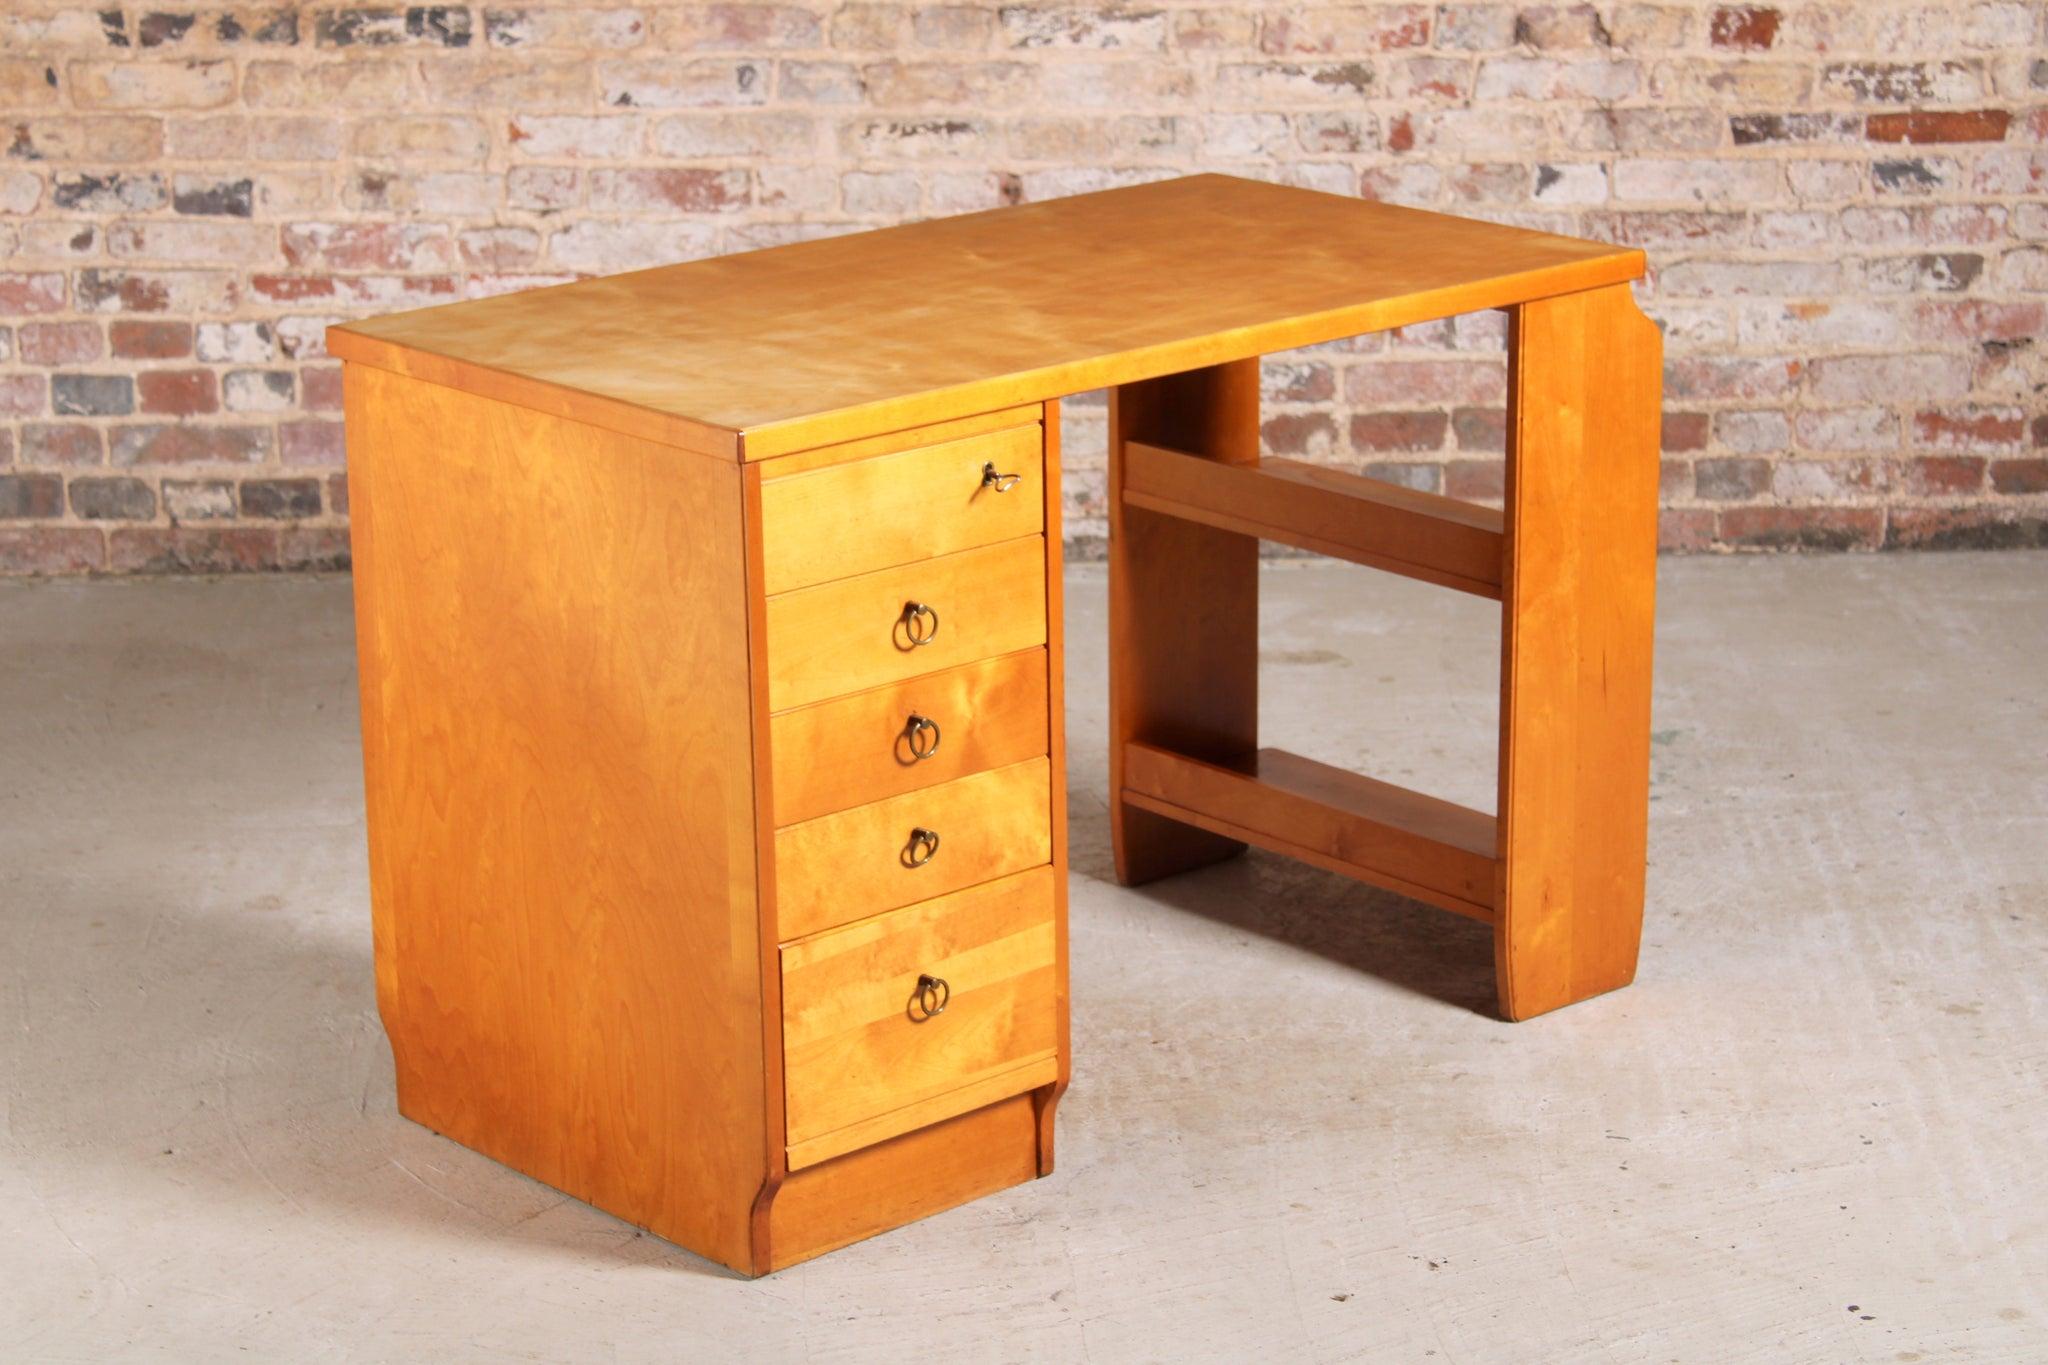 Mid-century birch writing desk with shelves by Ilmari Tapiovaara, Finland, circa 1950s. Lockable top drawer and 4 other drawers with brass handles.

Dimension: W 116cm x D 60cm x H 75cm